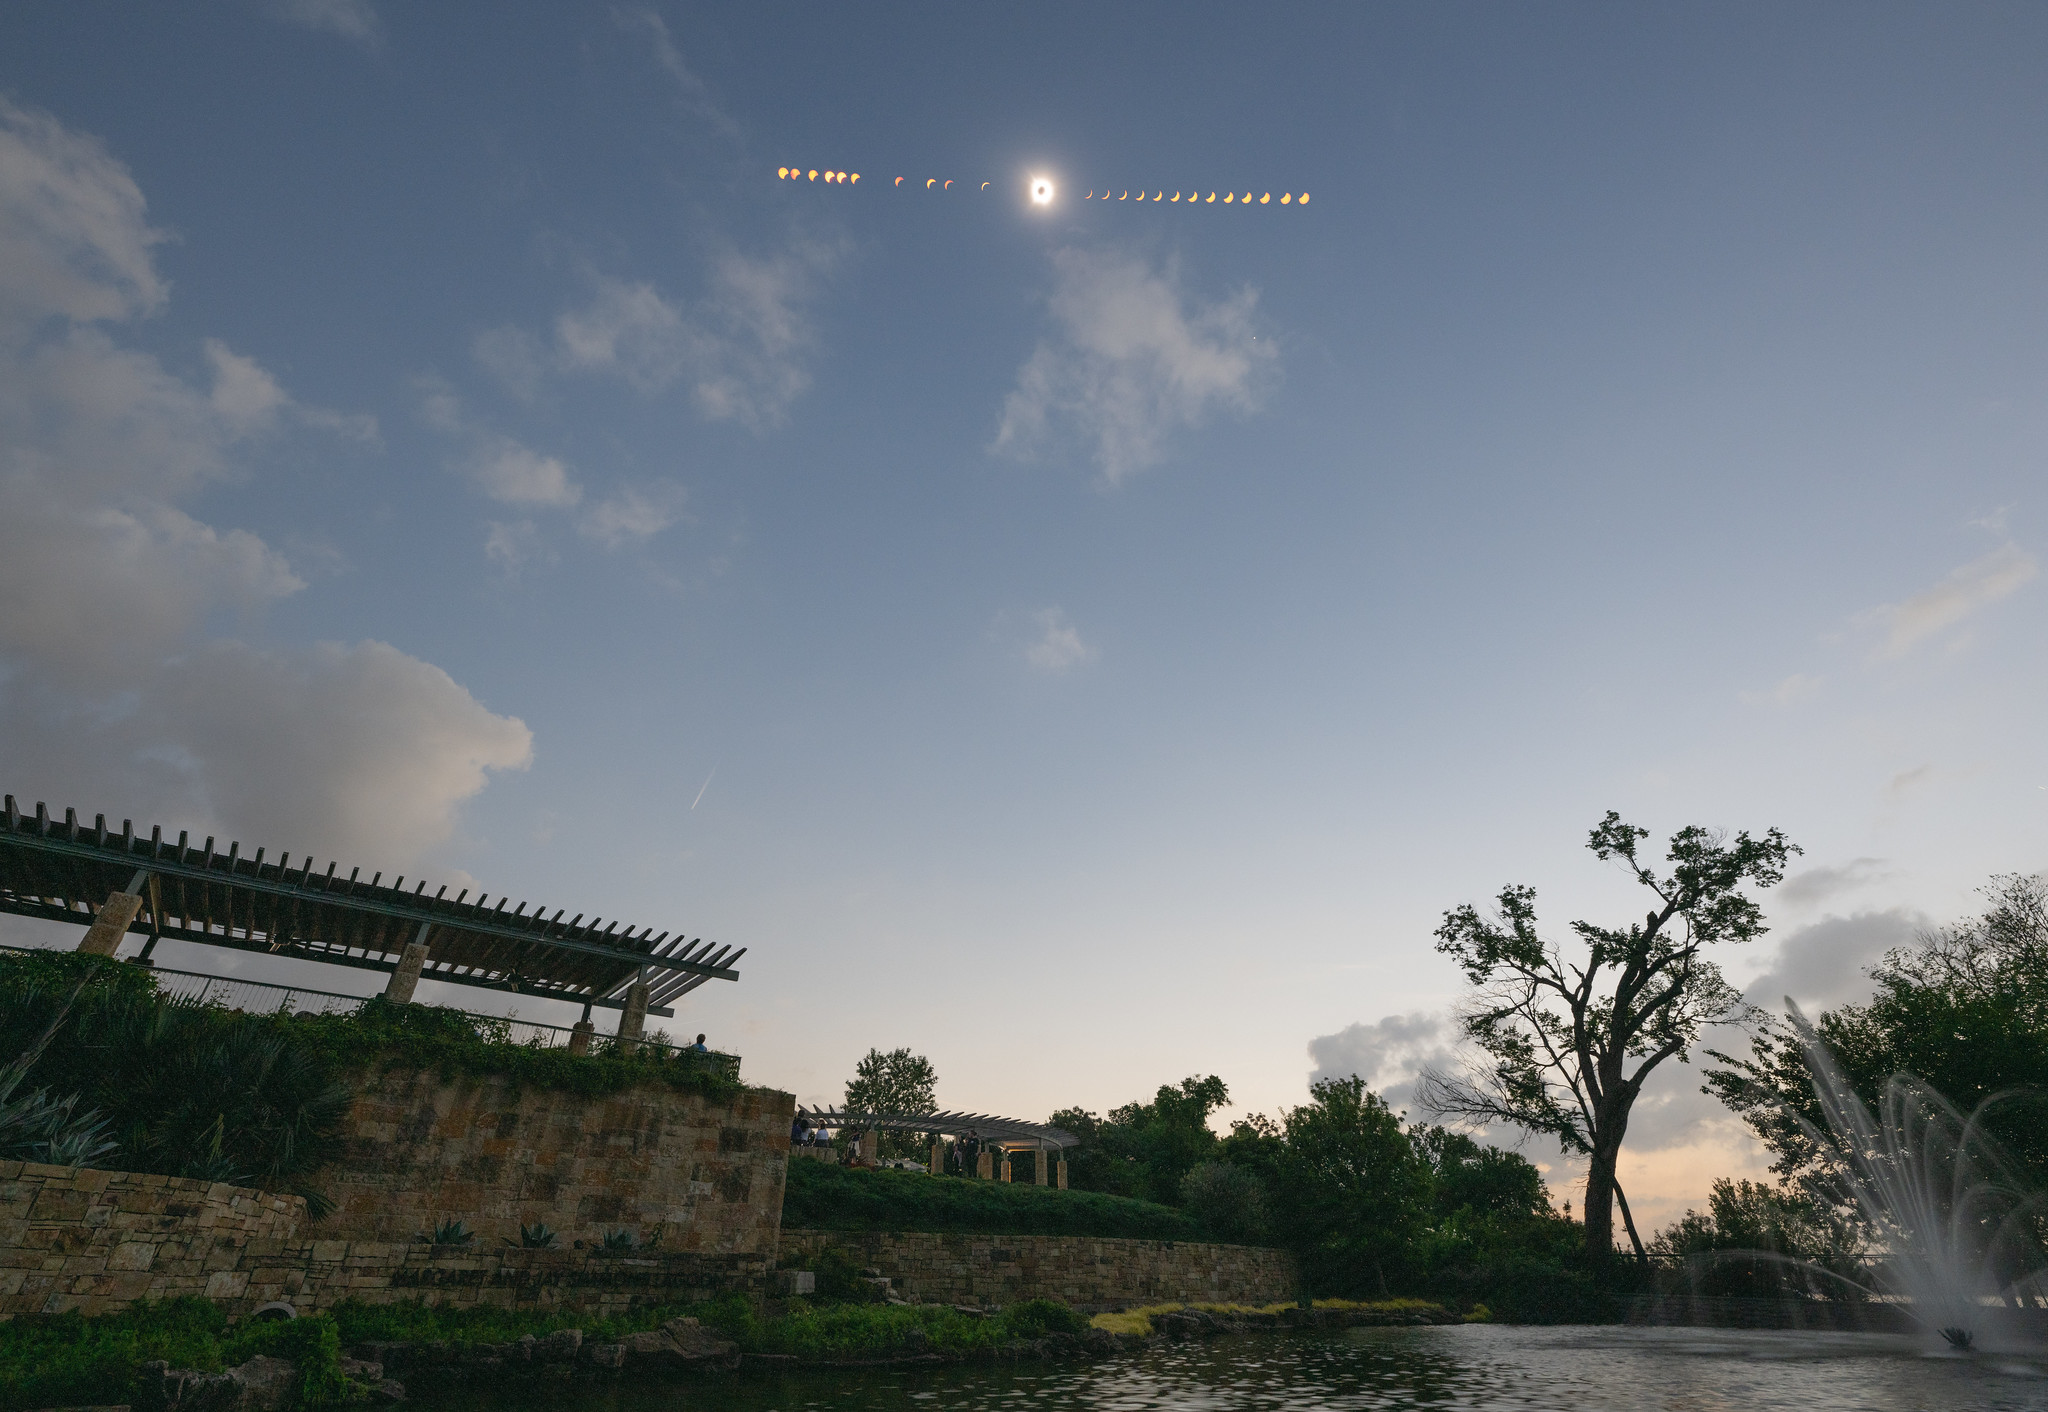 Above a garden, pergola, pond, and fountain, the stages of the eclipse are seen in the sky. From left to right, the Sun changes from partially covered, to a crescent, to a total solar eclipse, then back to a crescent and partially covered again.